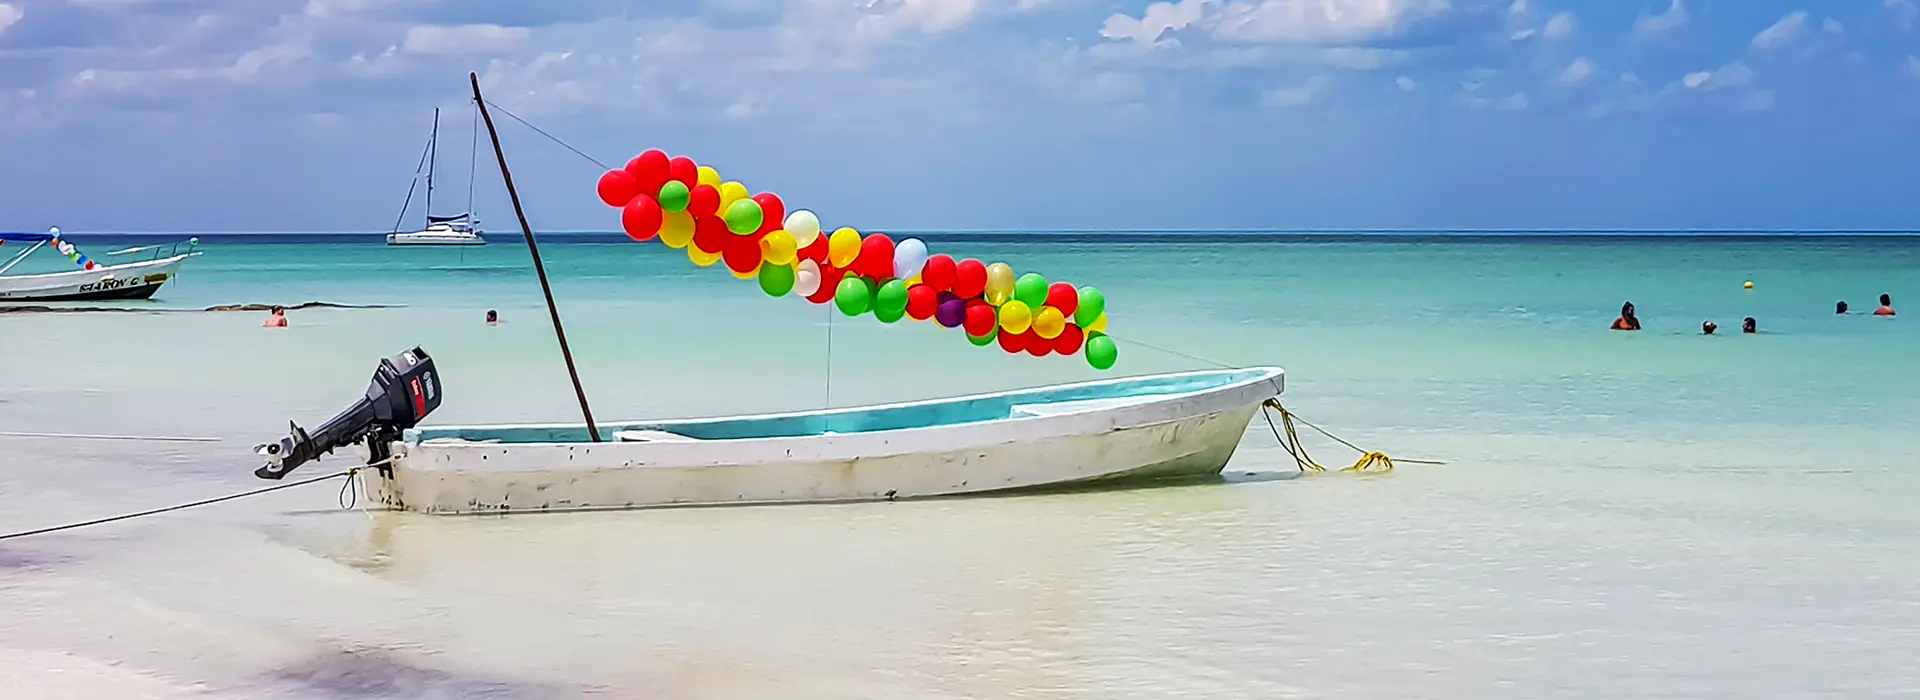 Colorfully decorated boat on the beach of Holbox Island